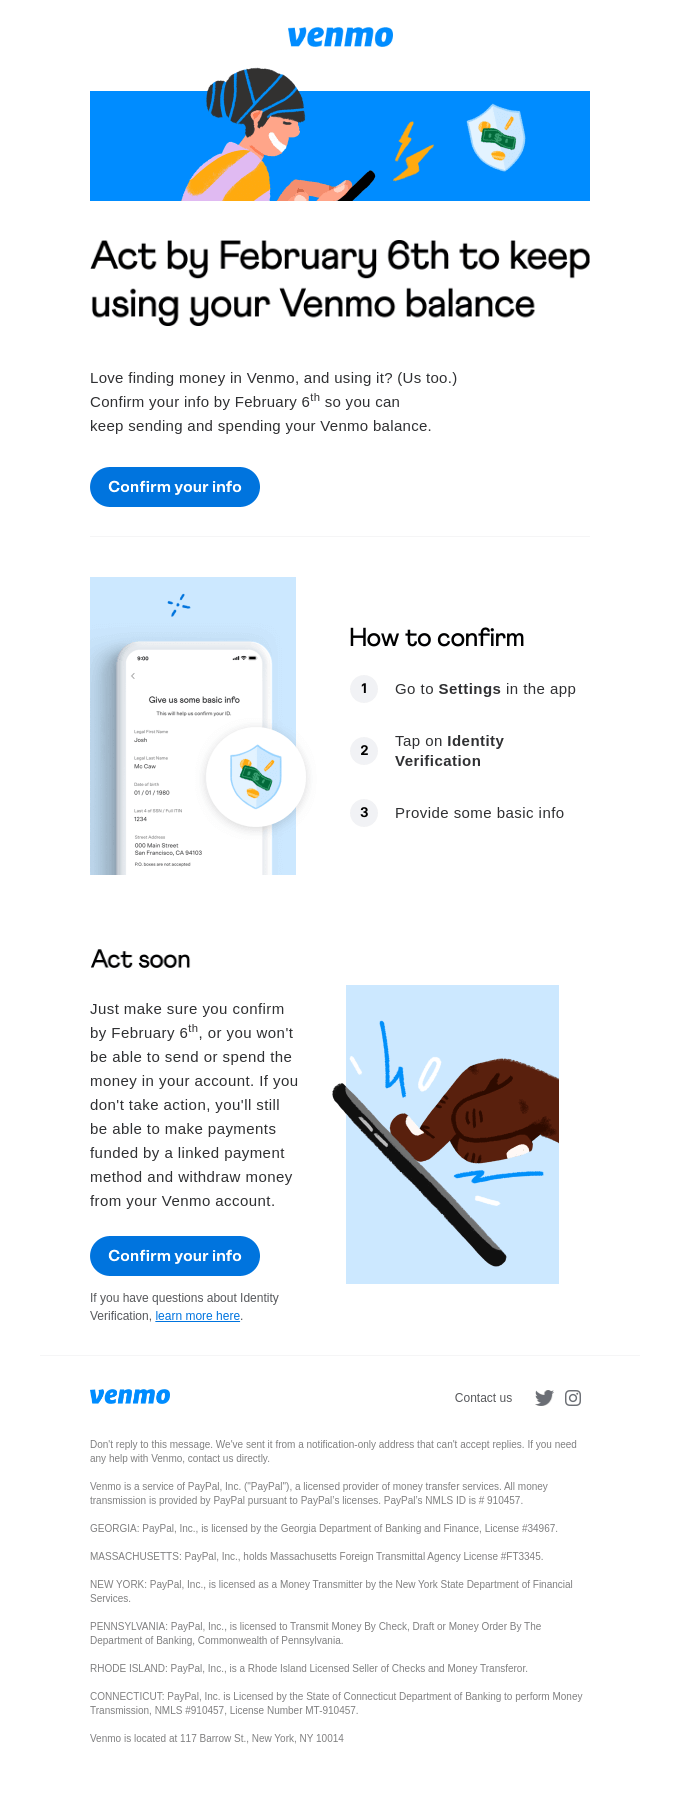 A few days left! Confirm your identity to keep using Venmo the way you always have